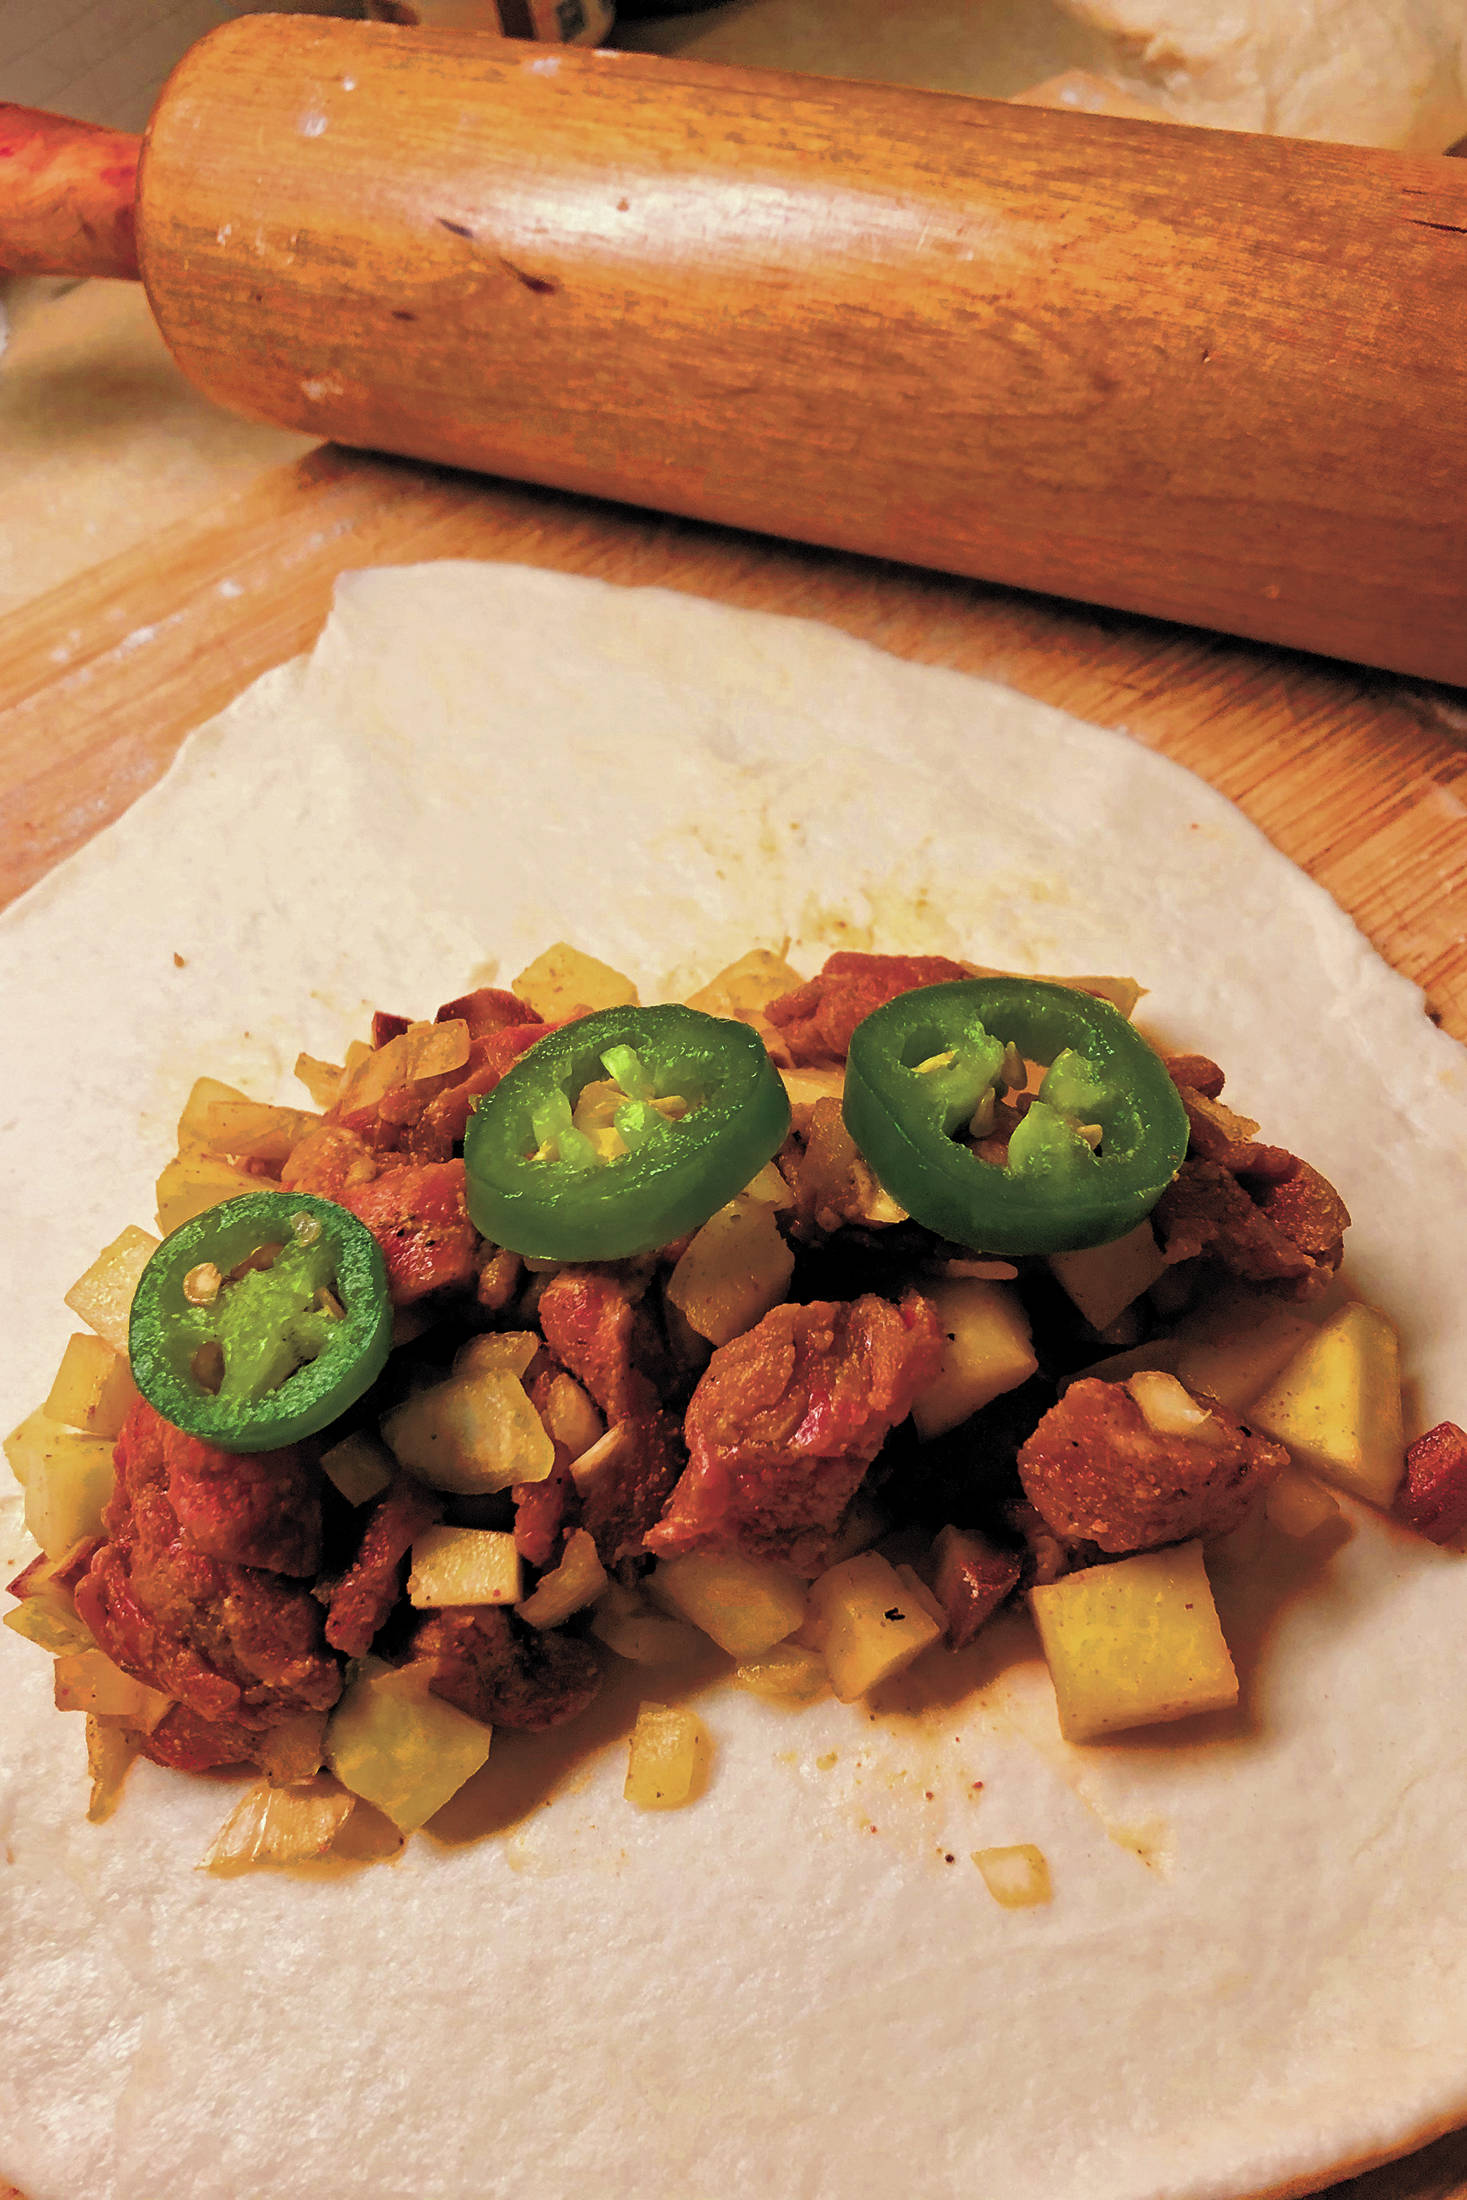 Jalapenos add a kick to the traditional Cornish pasty, seen here Christmas Day, Dec. 25, 2020 in Crystal Falls, Michigan. (Photo by Megan Pacer/Homer News)